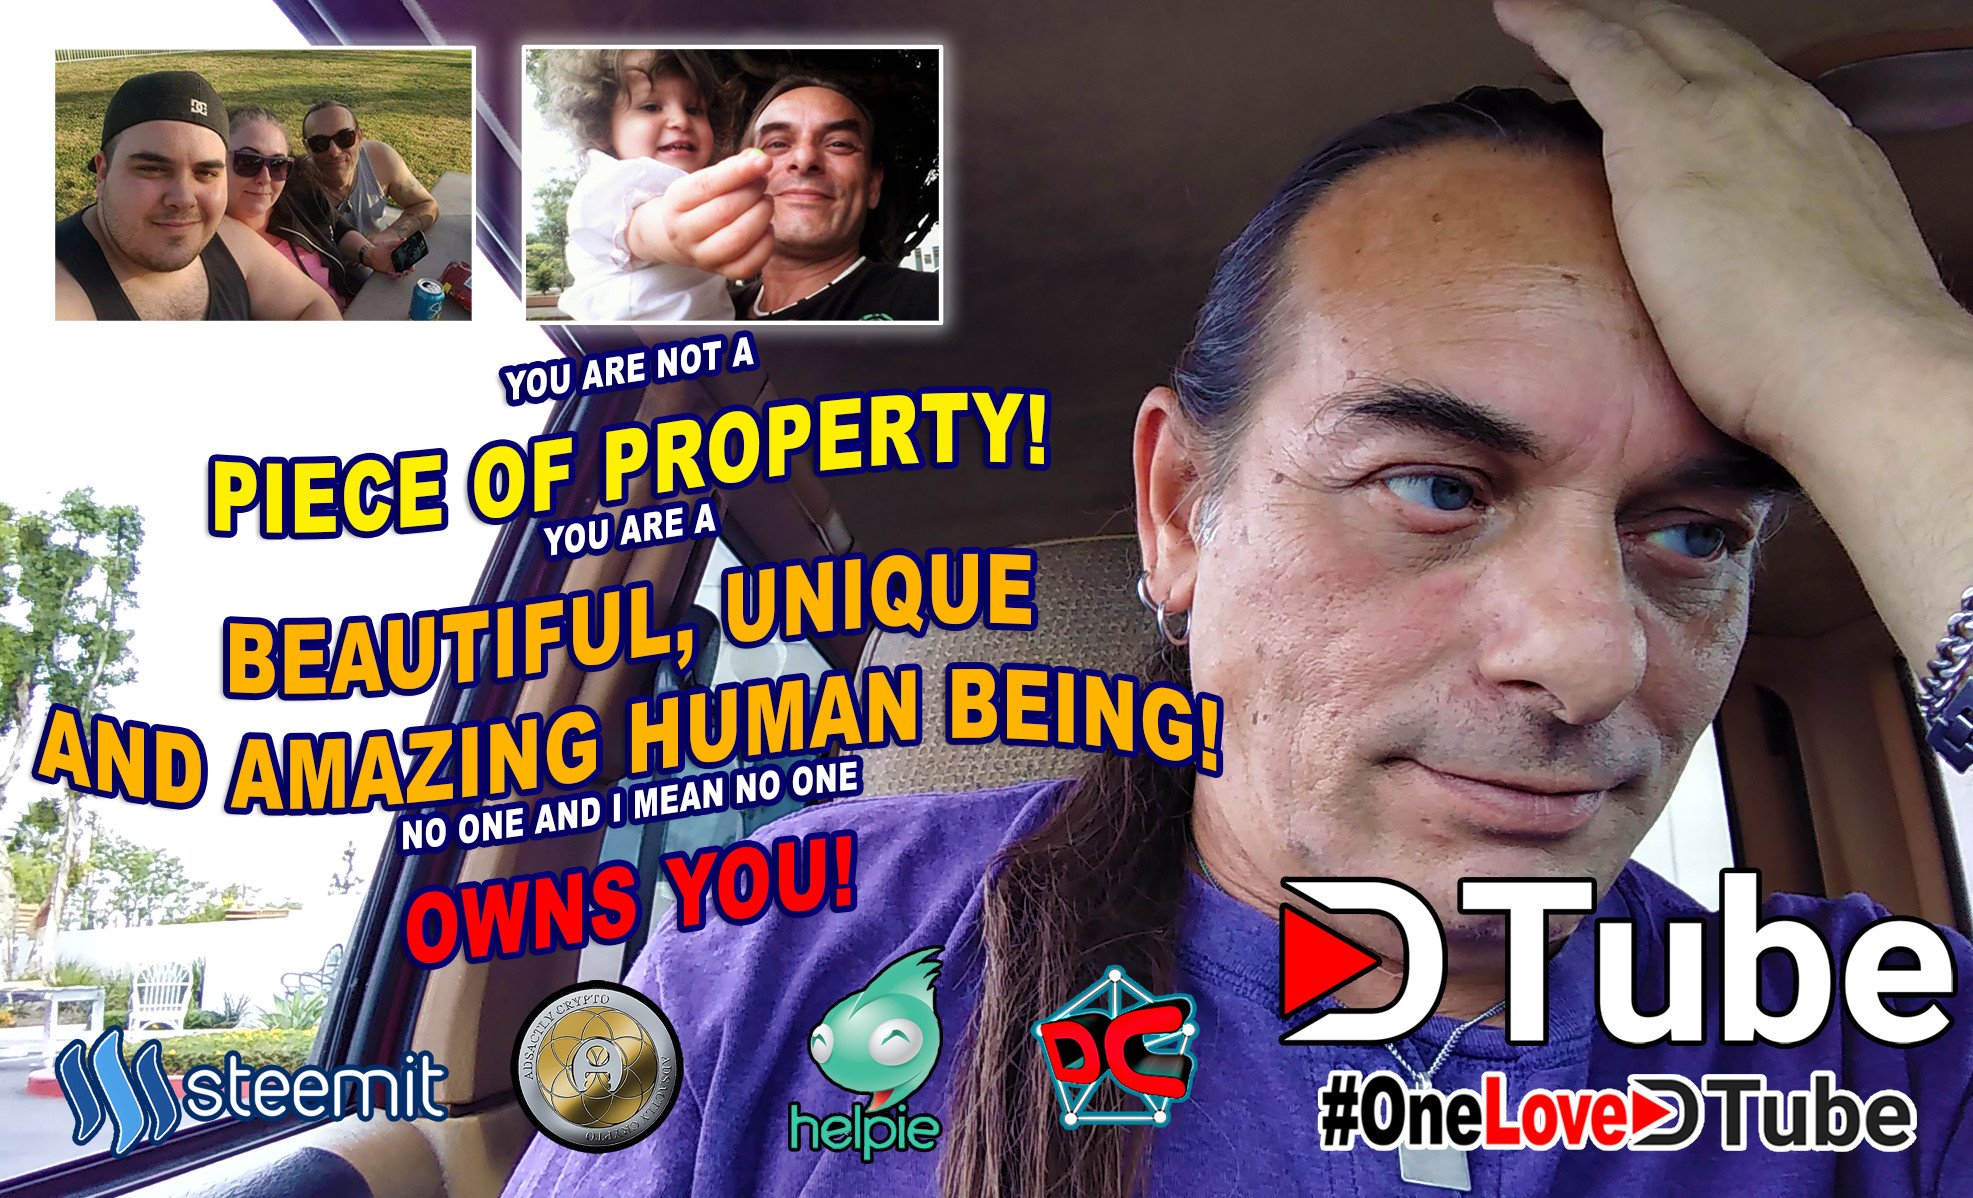 YOU are NOT A PIECE of PROPERTY - YOU ARE A UNIQUE, BEAUTIFUL HUMAN BEING - NO ONE OWNS YOU.jpg